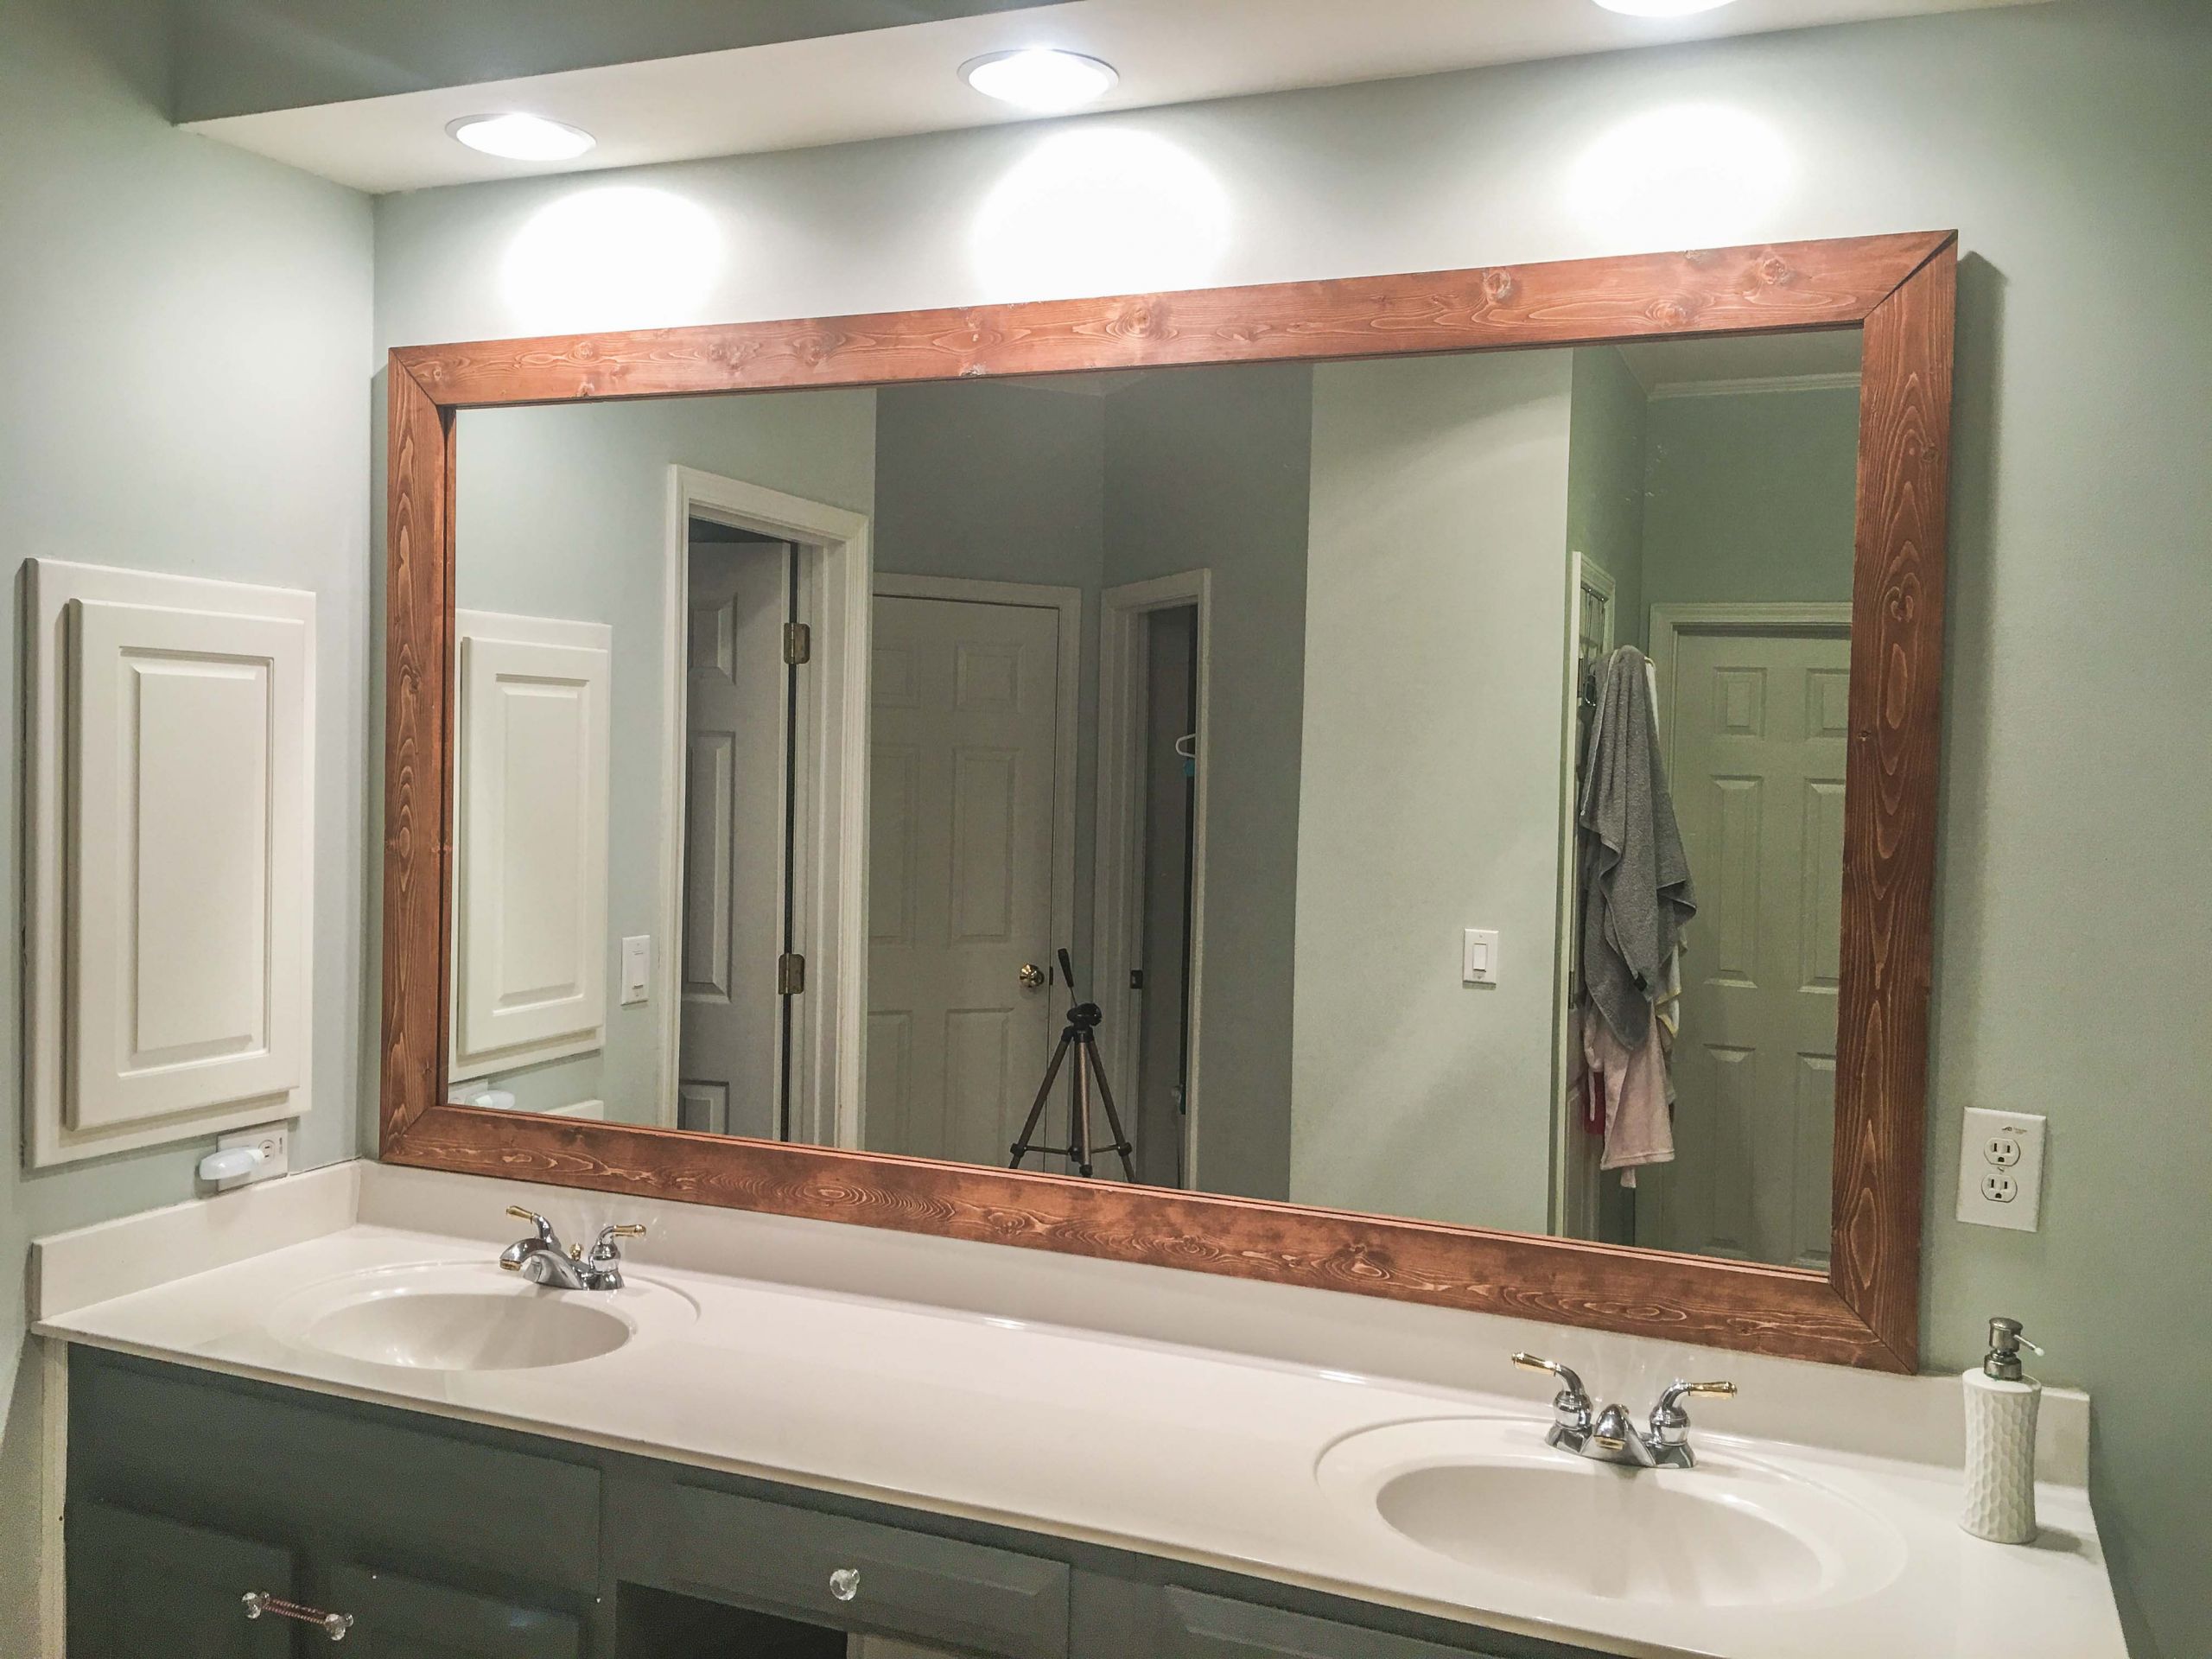 Bathroom Mirrors With Frames
 How to DIY Upgrade Your Bathroom Mirror With a Stained